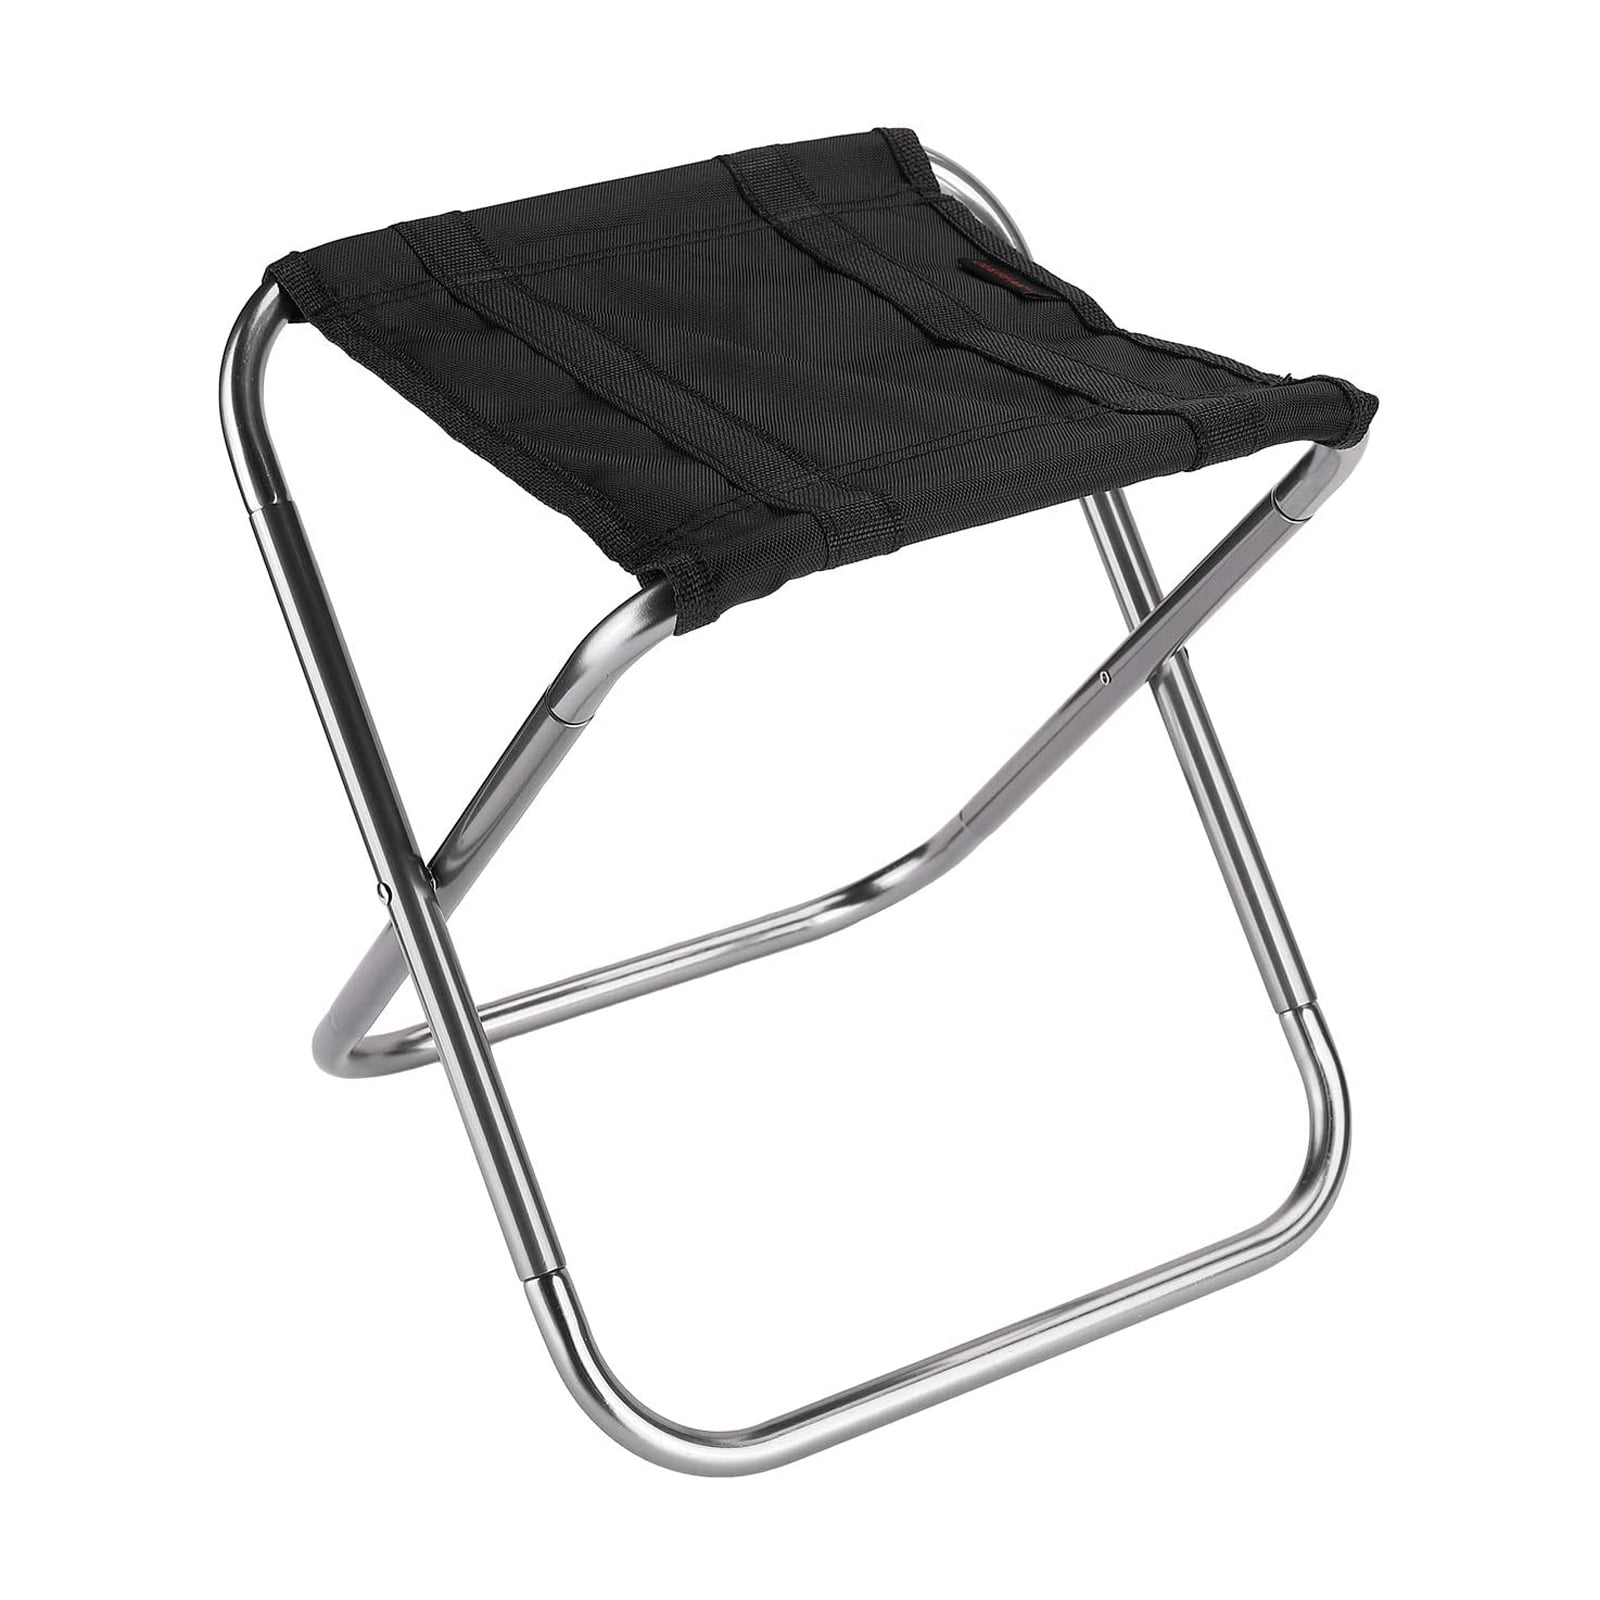 Aluminum Portable Folding Chair Stool Seat For Outdoor Fishing Camping 